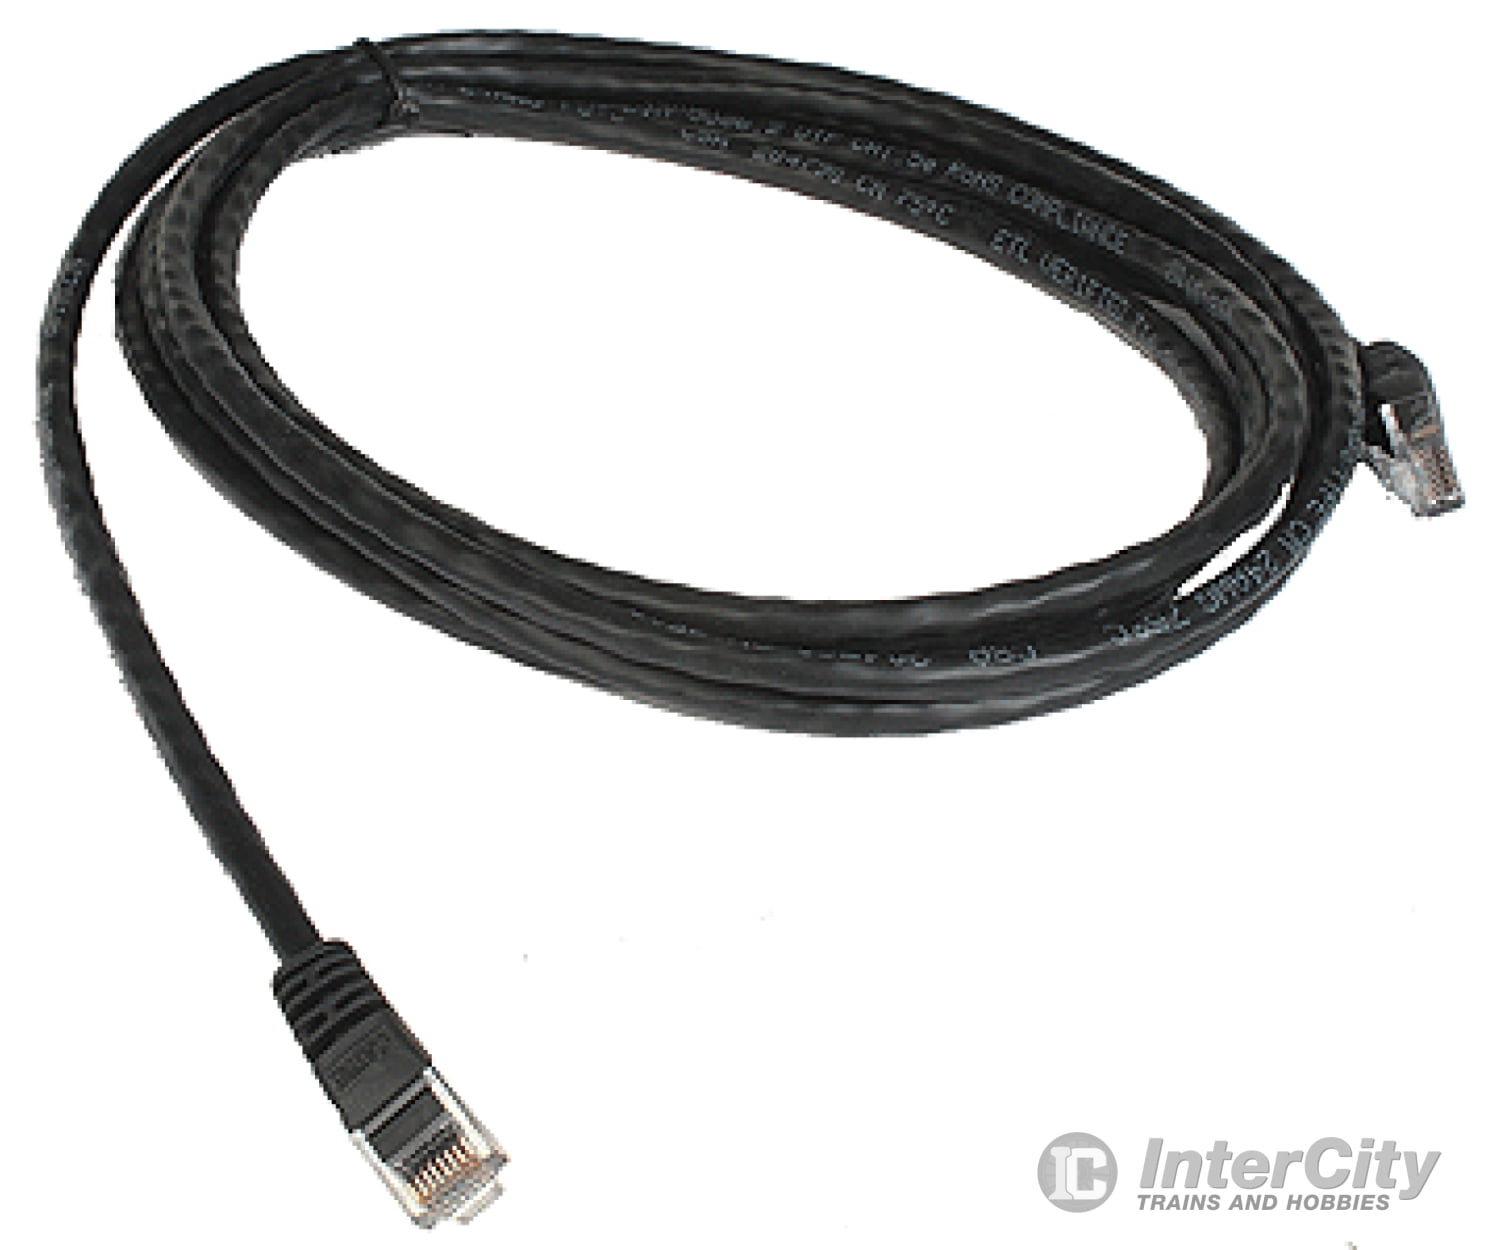 Nce 237 Cat5 Cable - - 10’ 3.05M Dcc Accessories